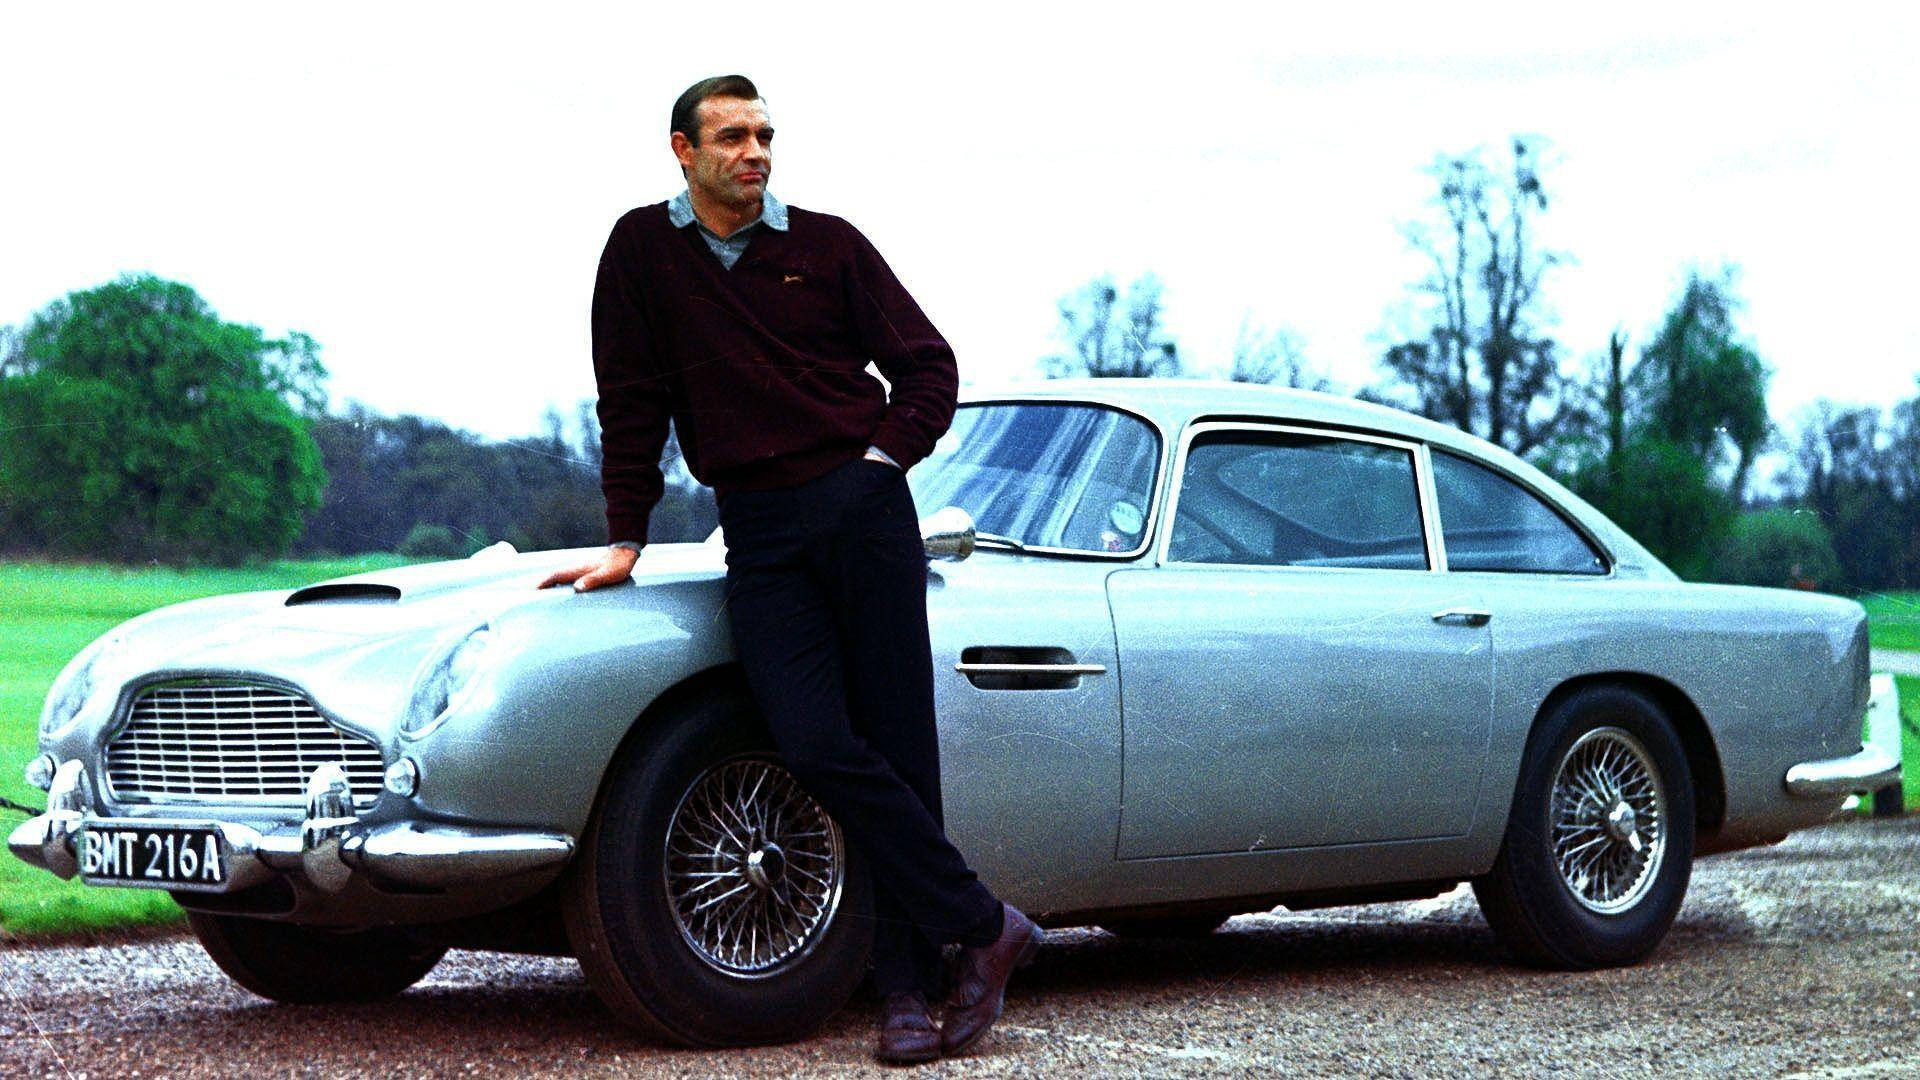 James Bond With Old Car Background